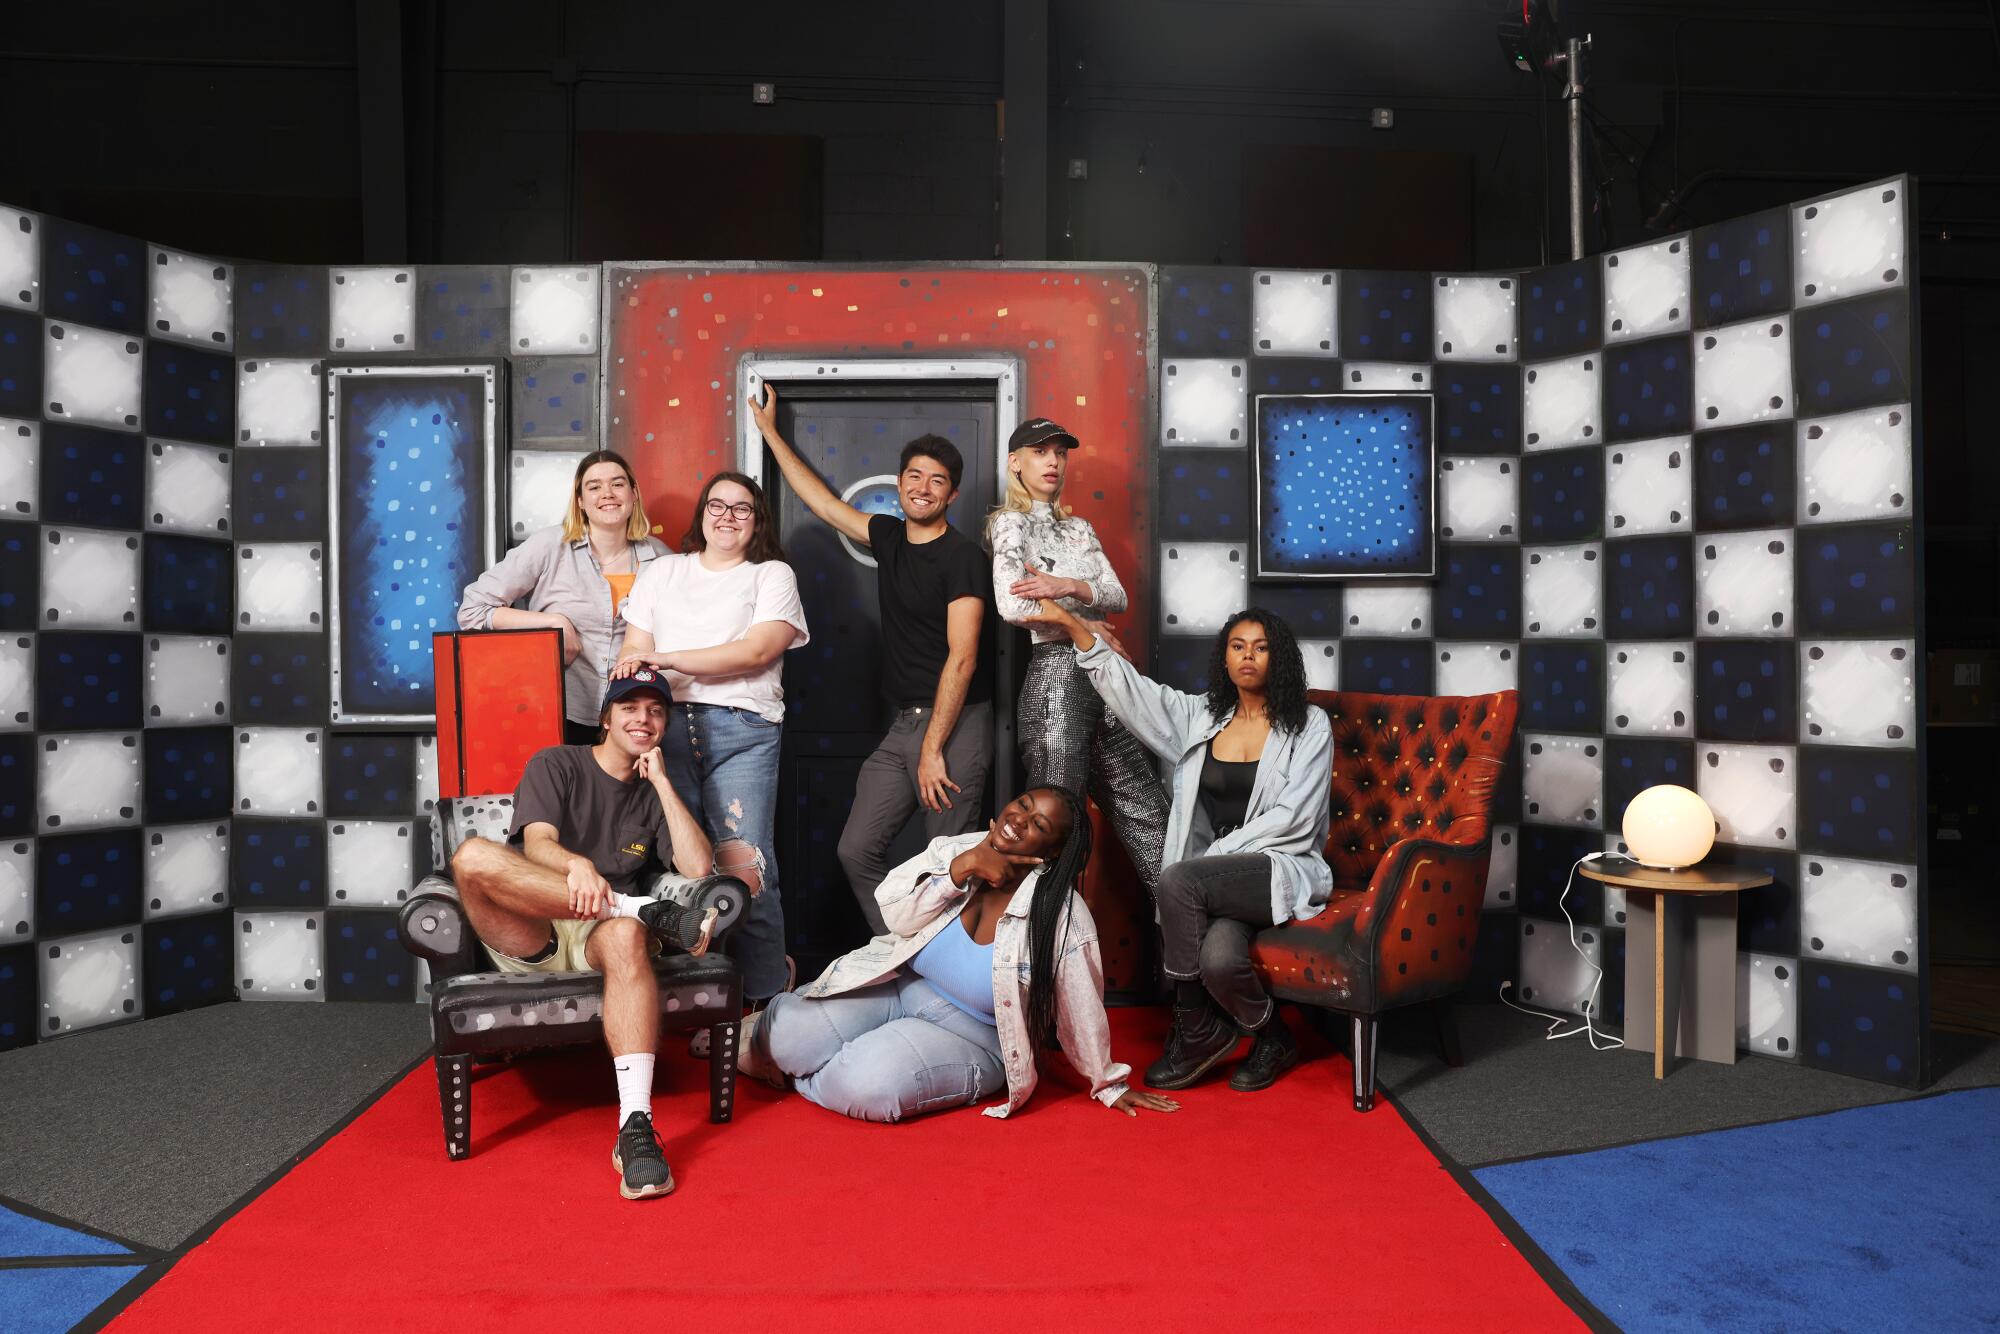  The cast of "Stapleview" on a set of checkboard walls and red and blue decor.